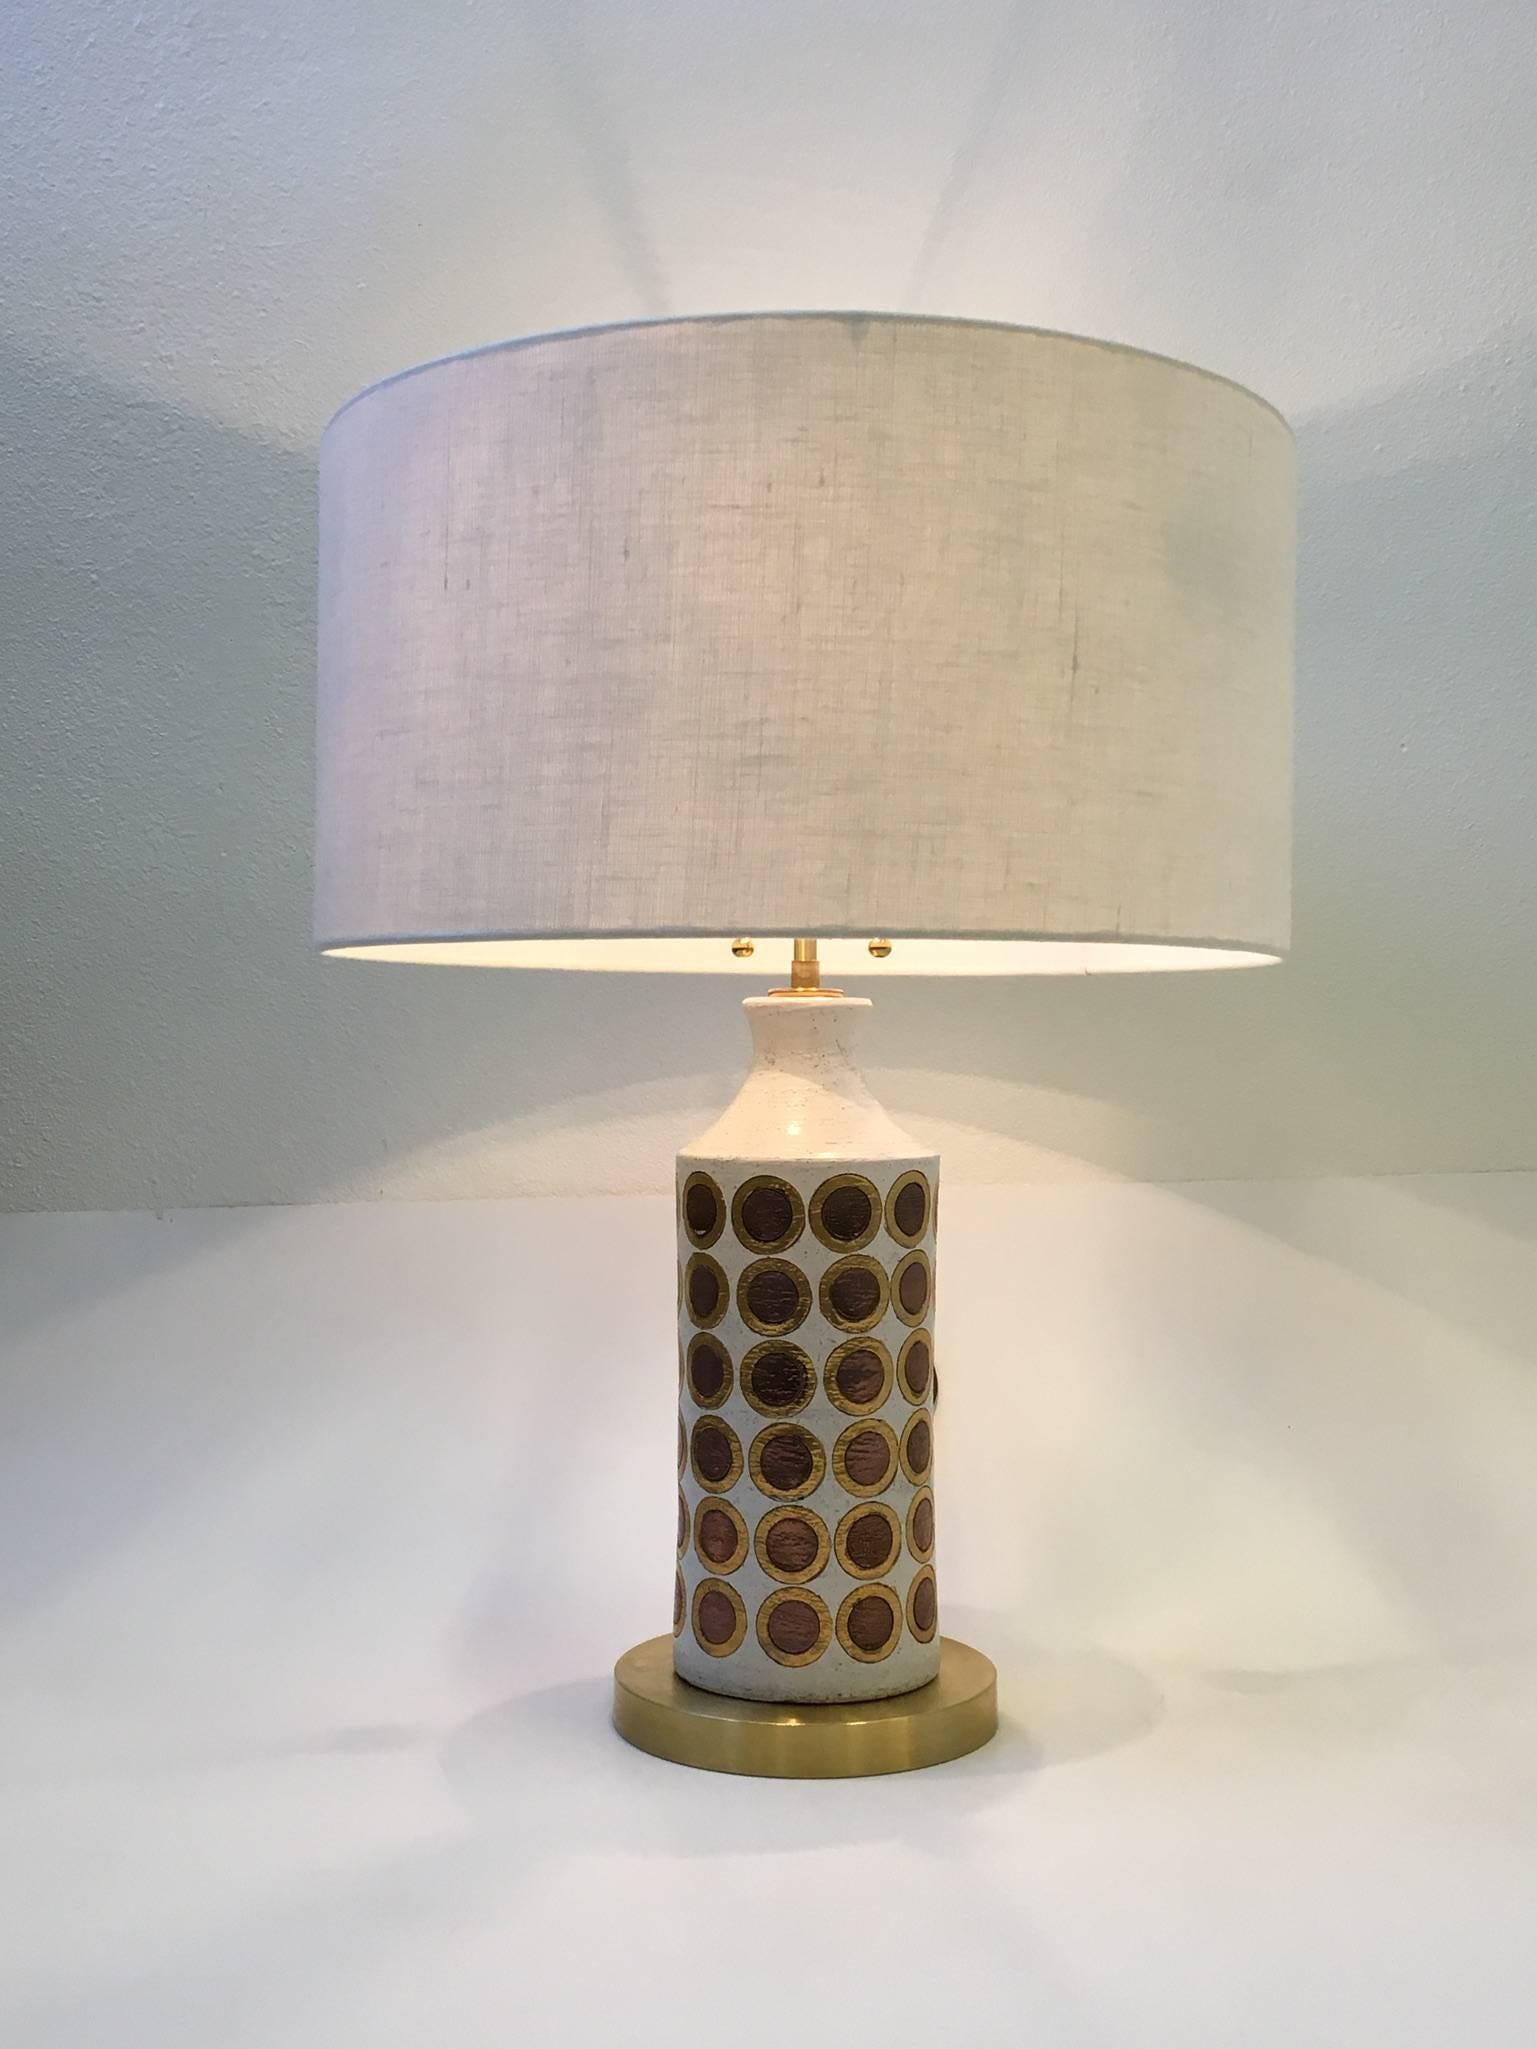 A rare 1960s Italian ceramic table lamp by Bitossi. The lamp has beautiful circles glazed in gold and copper with a white background. Newly rewired with all new brass hardware, brown cloth cord and new vanilla linen shade. 
Dimensions: 26.5